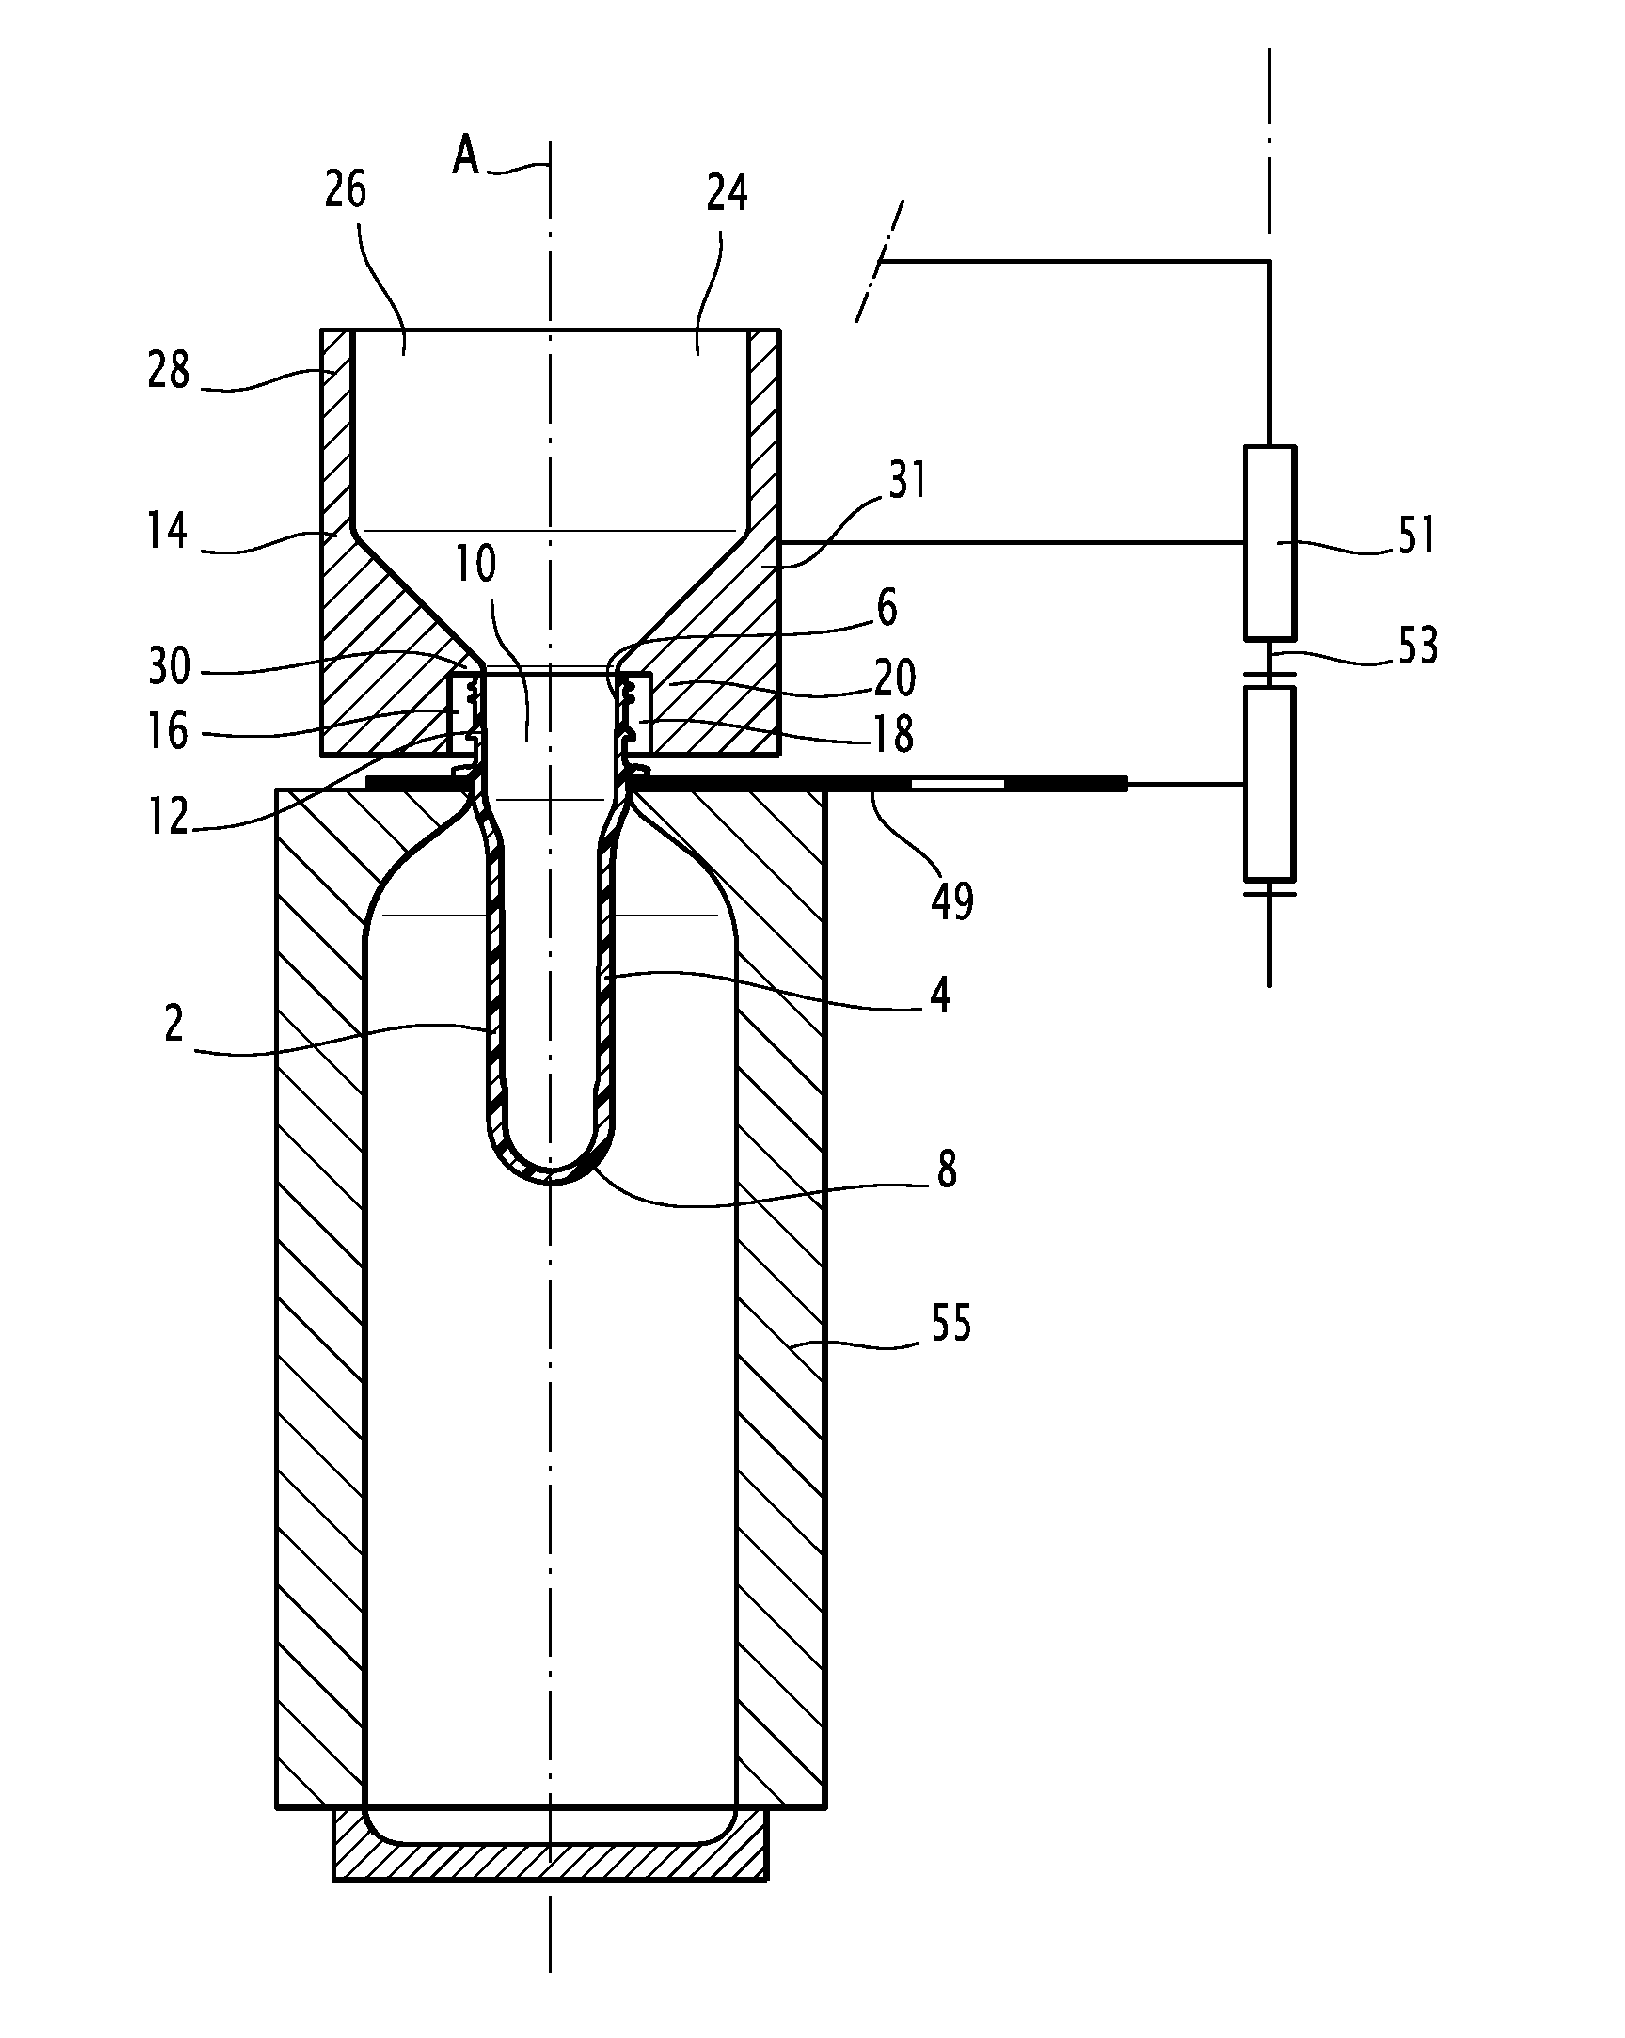 Extension device for the neck of a container formed in a machine for forming containers from preforms